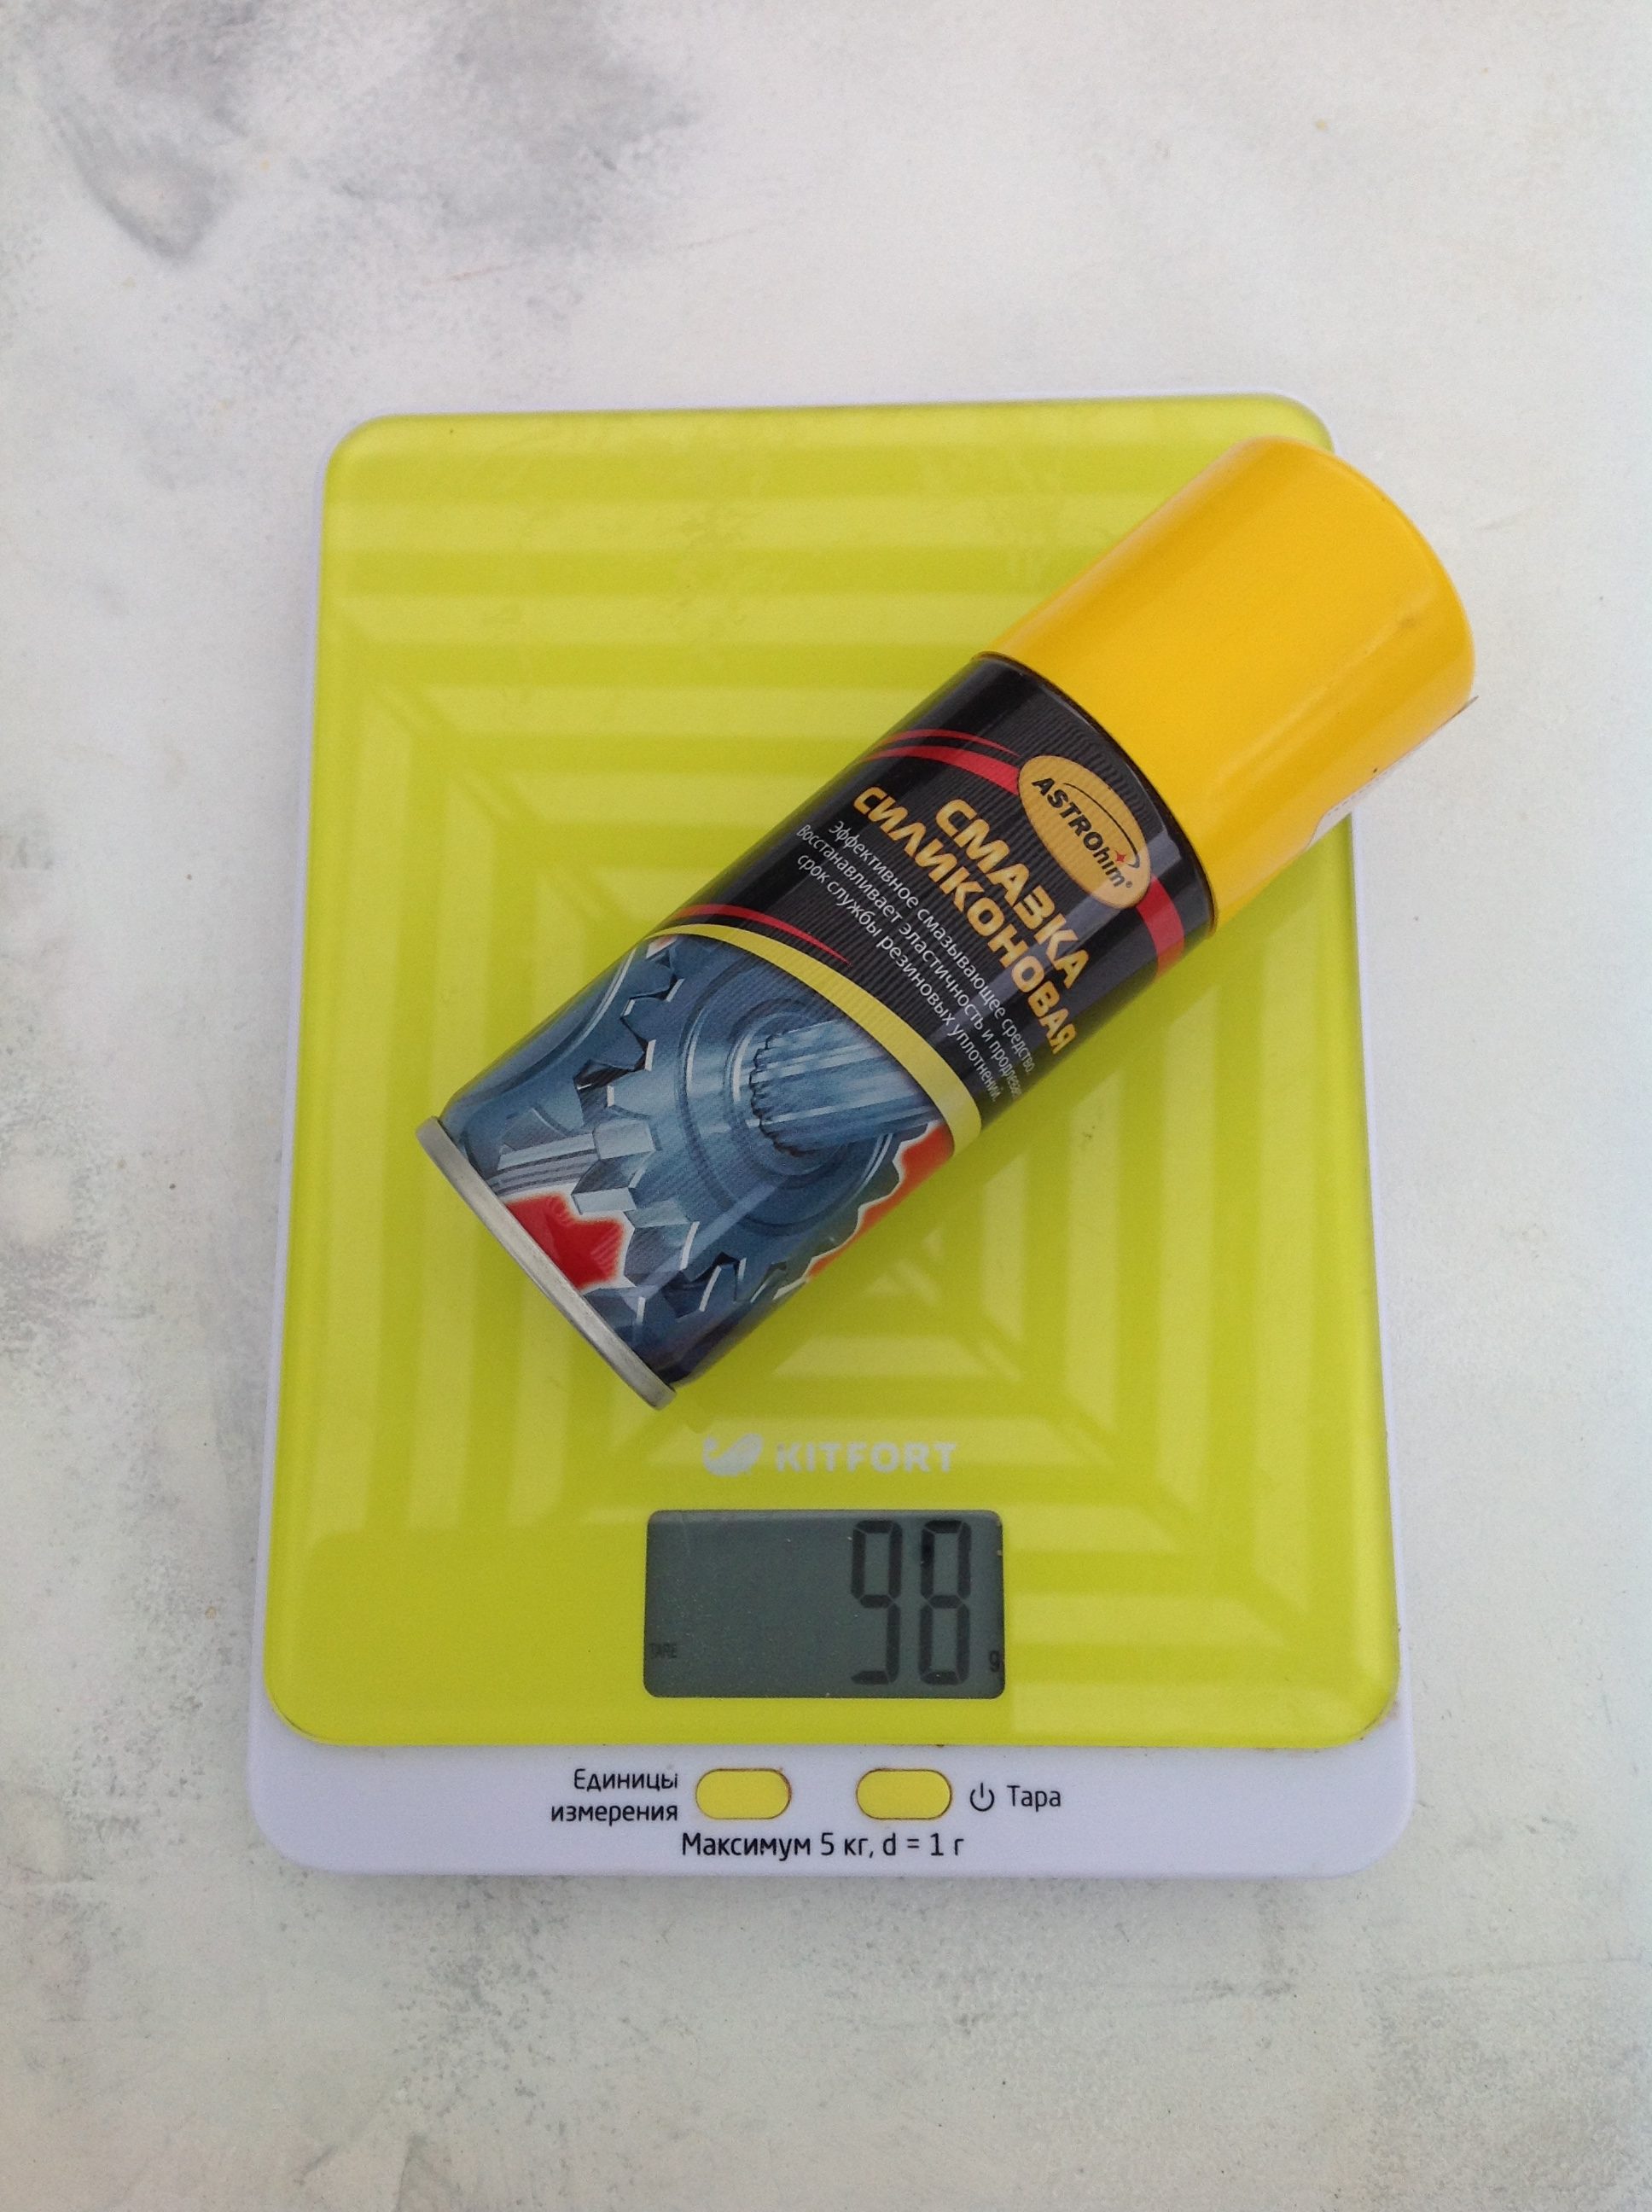 weight of a can of technical silicone grease